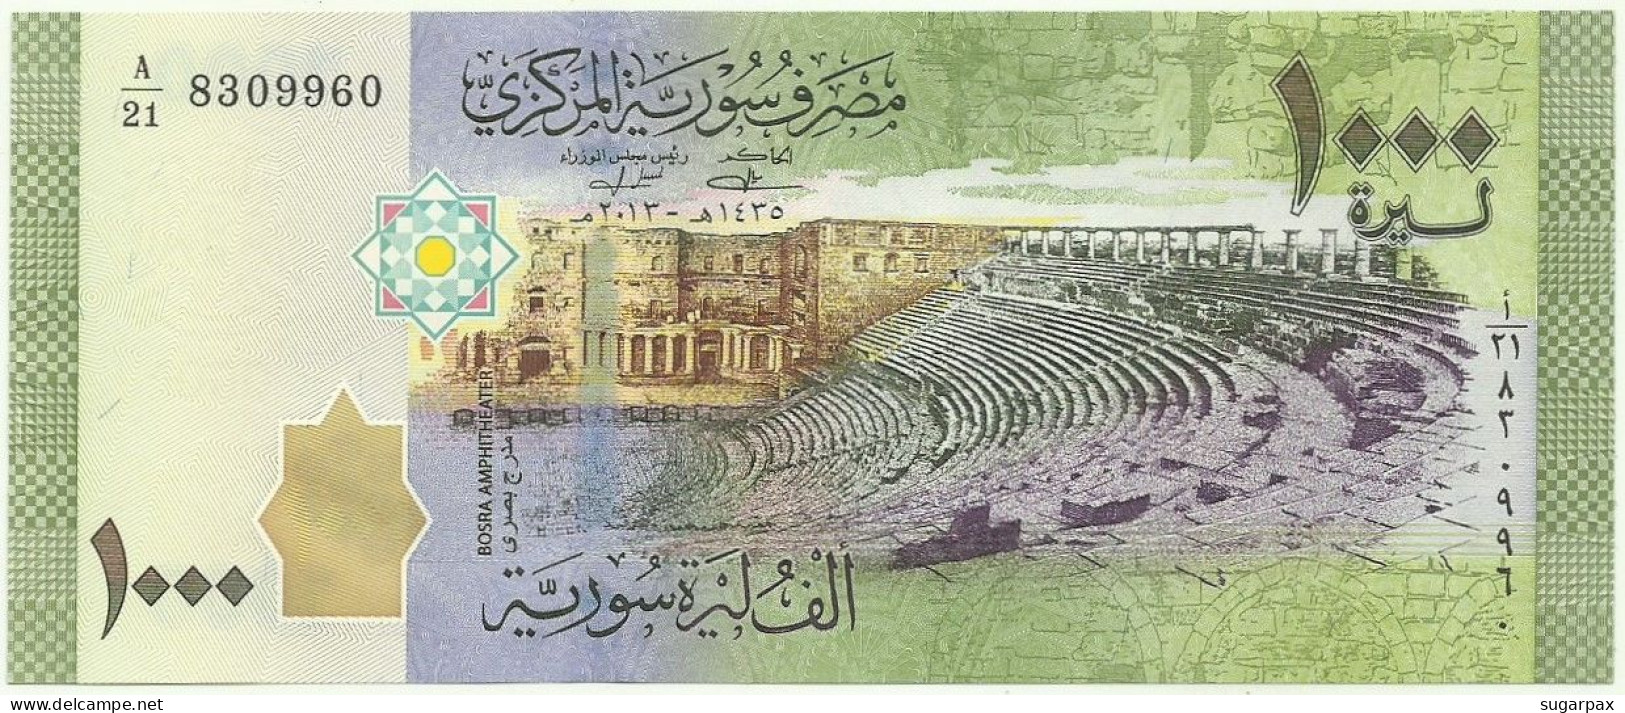 Syria - 1000 Syrian Pounds - 2013 / AH 1434 - Pick 116 - Unc. - Serie A/21 - 1.000 - Syrien